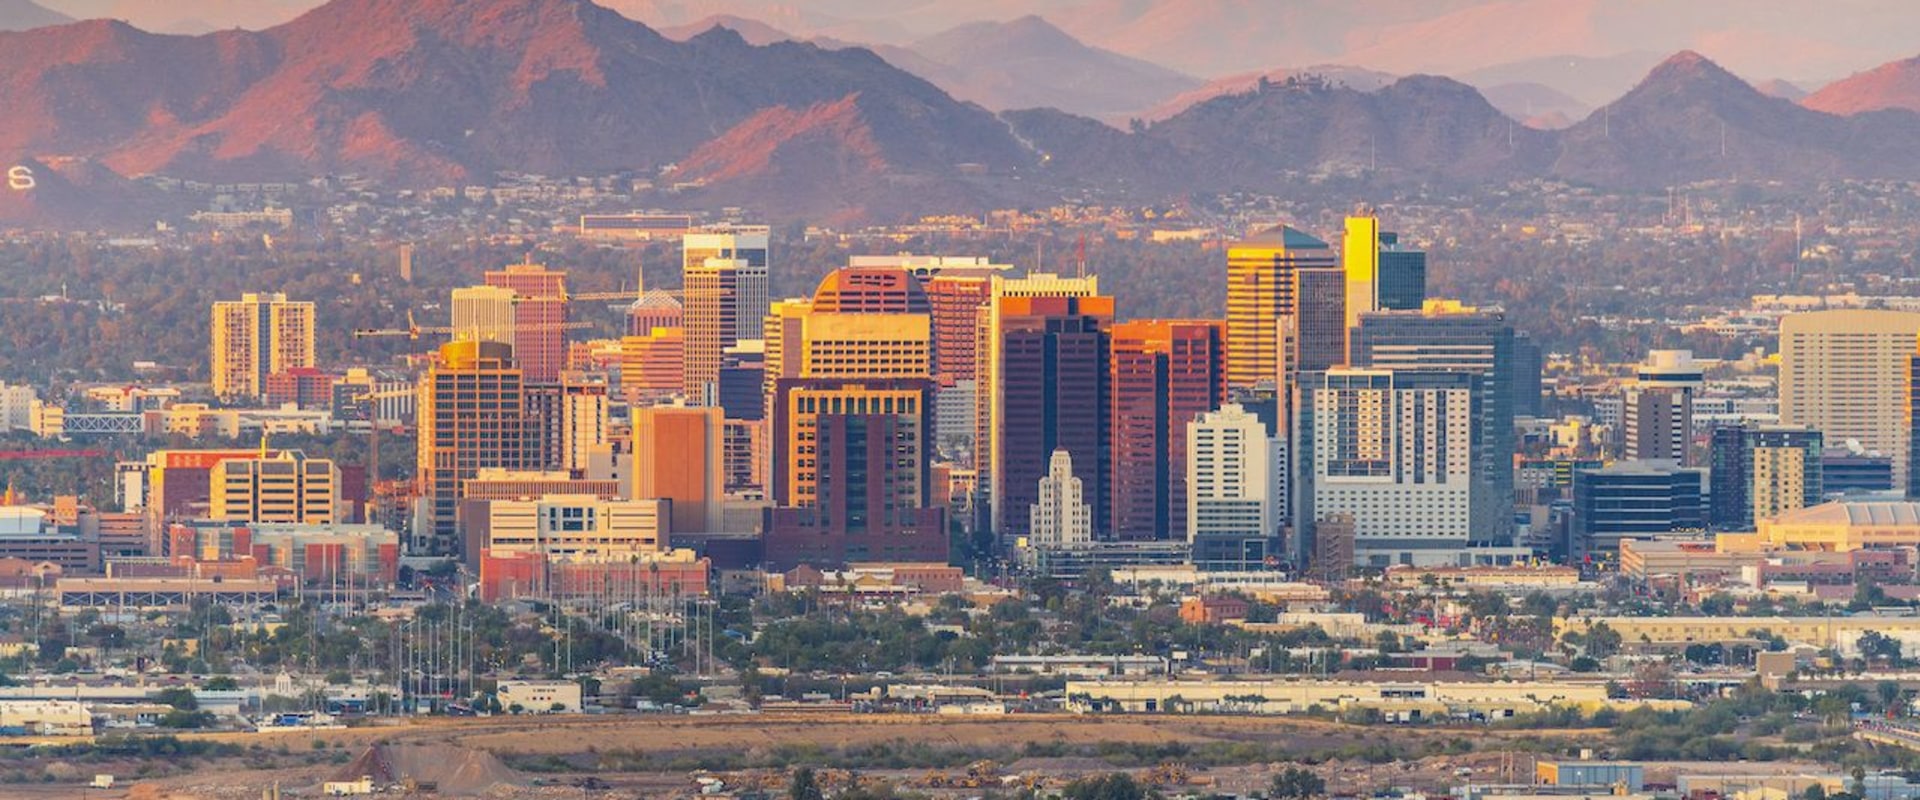 Phoenix or Scottsdale: Which is the Best City to Visit in Arizona?